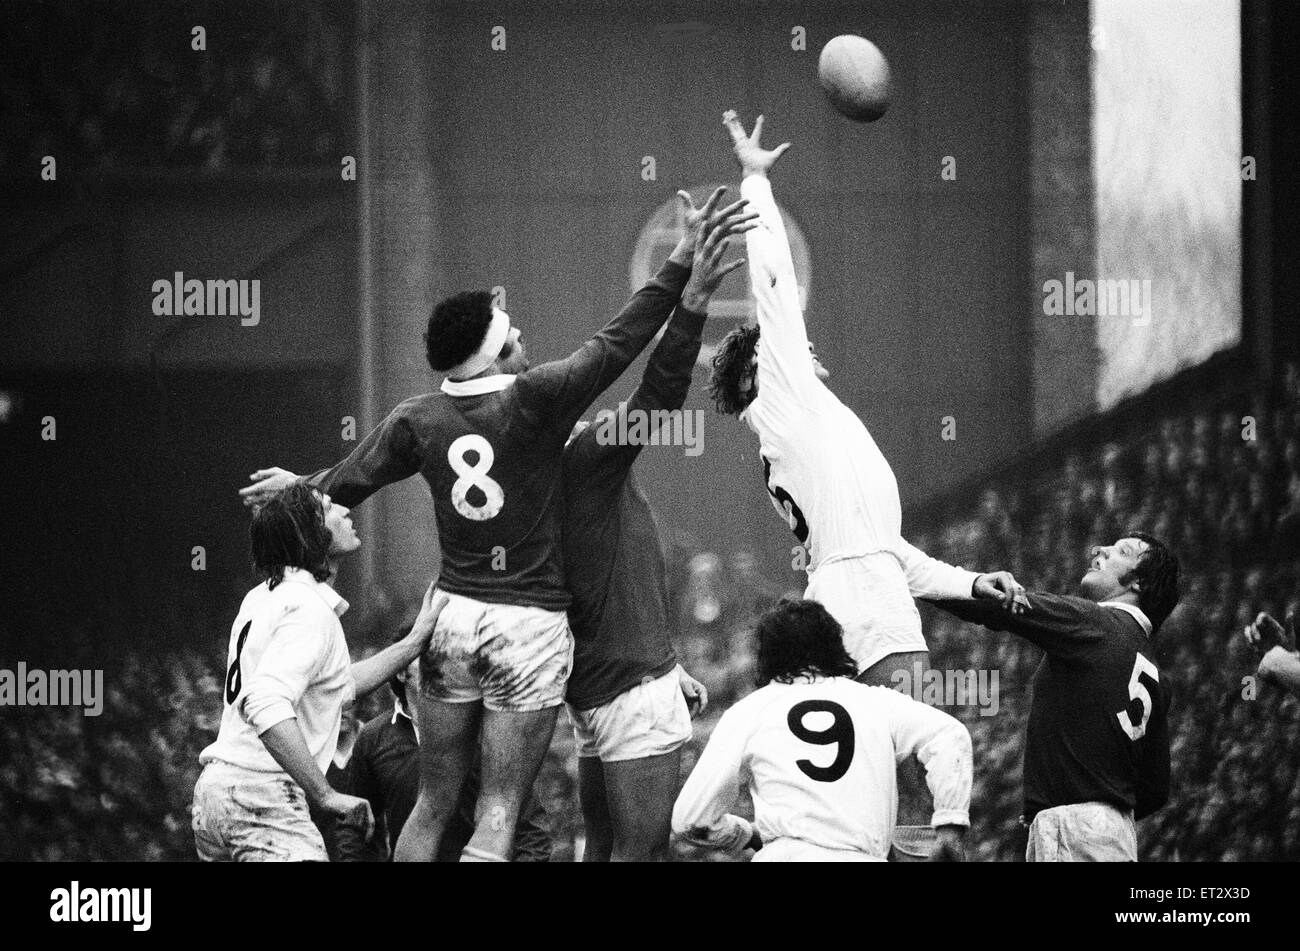 England 9-21 Wales, Rugby Union, Five Nations Championship match at Twickenham, 17th January 1976. Stock Photo